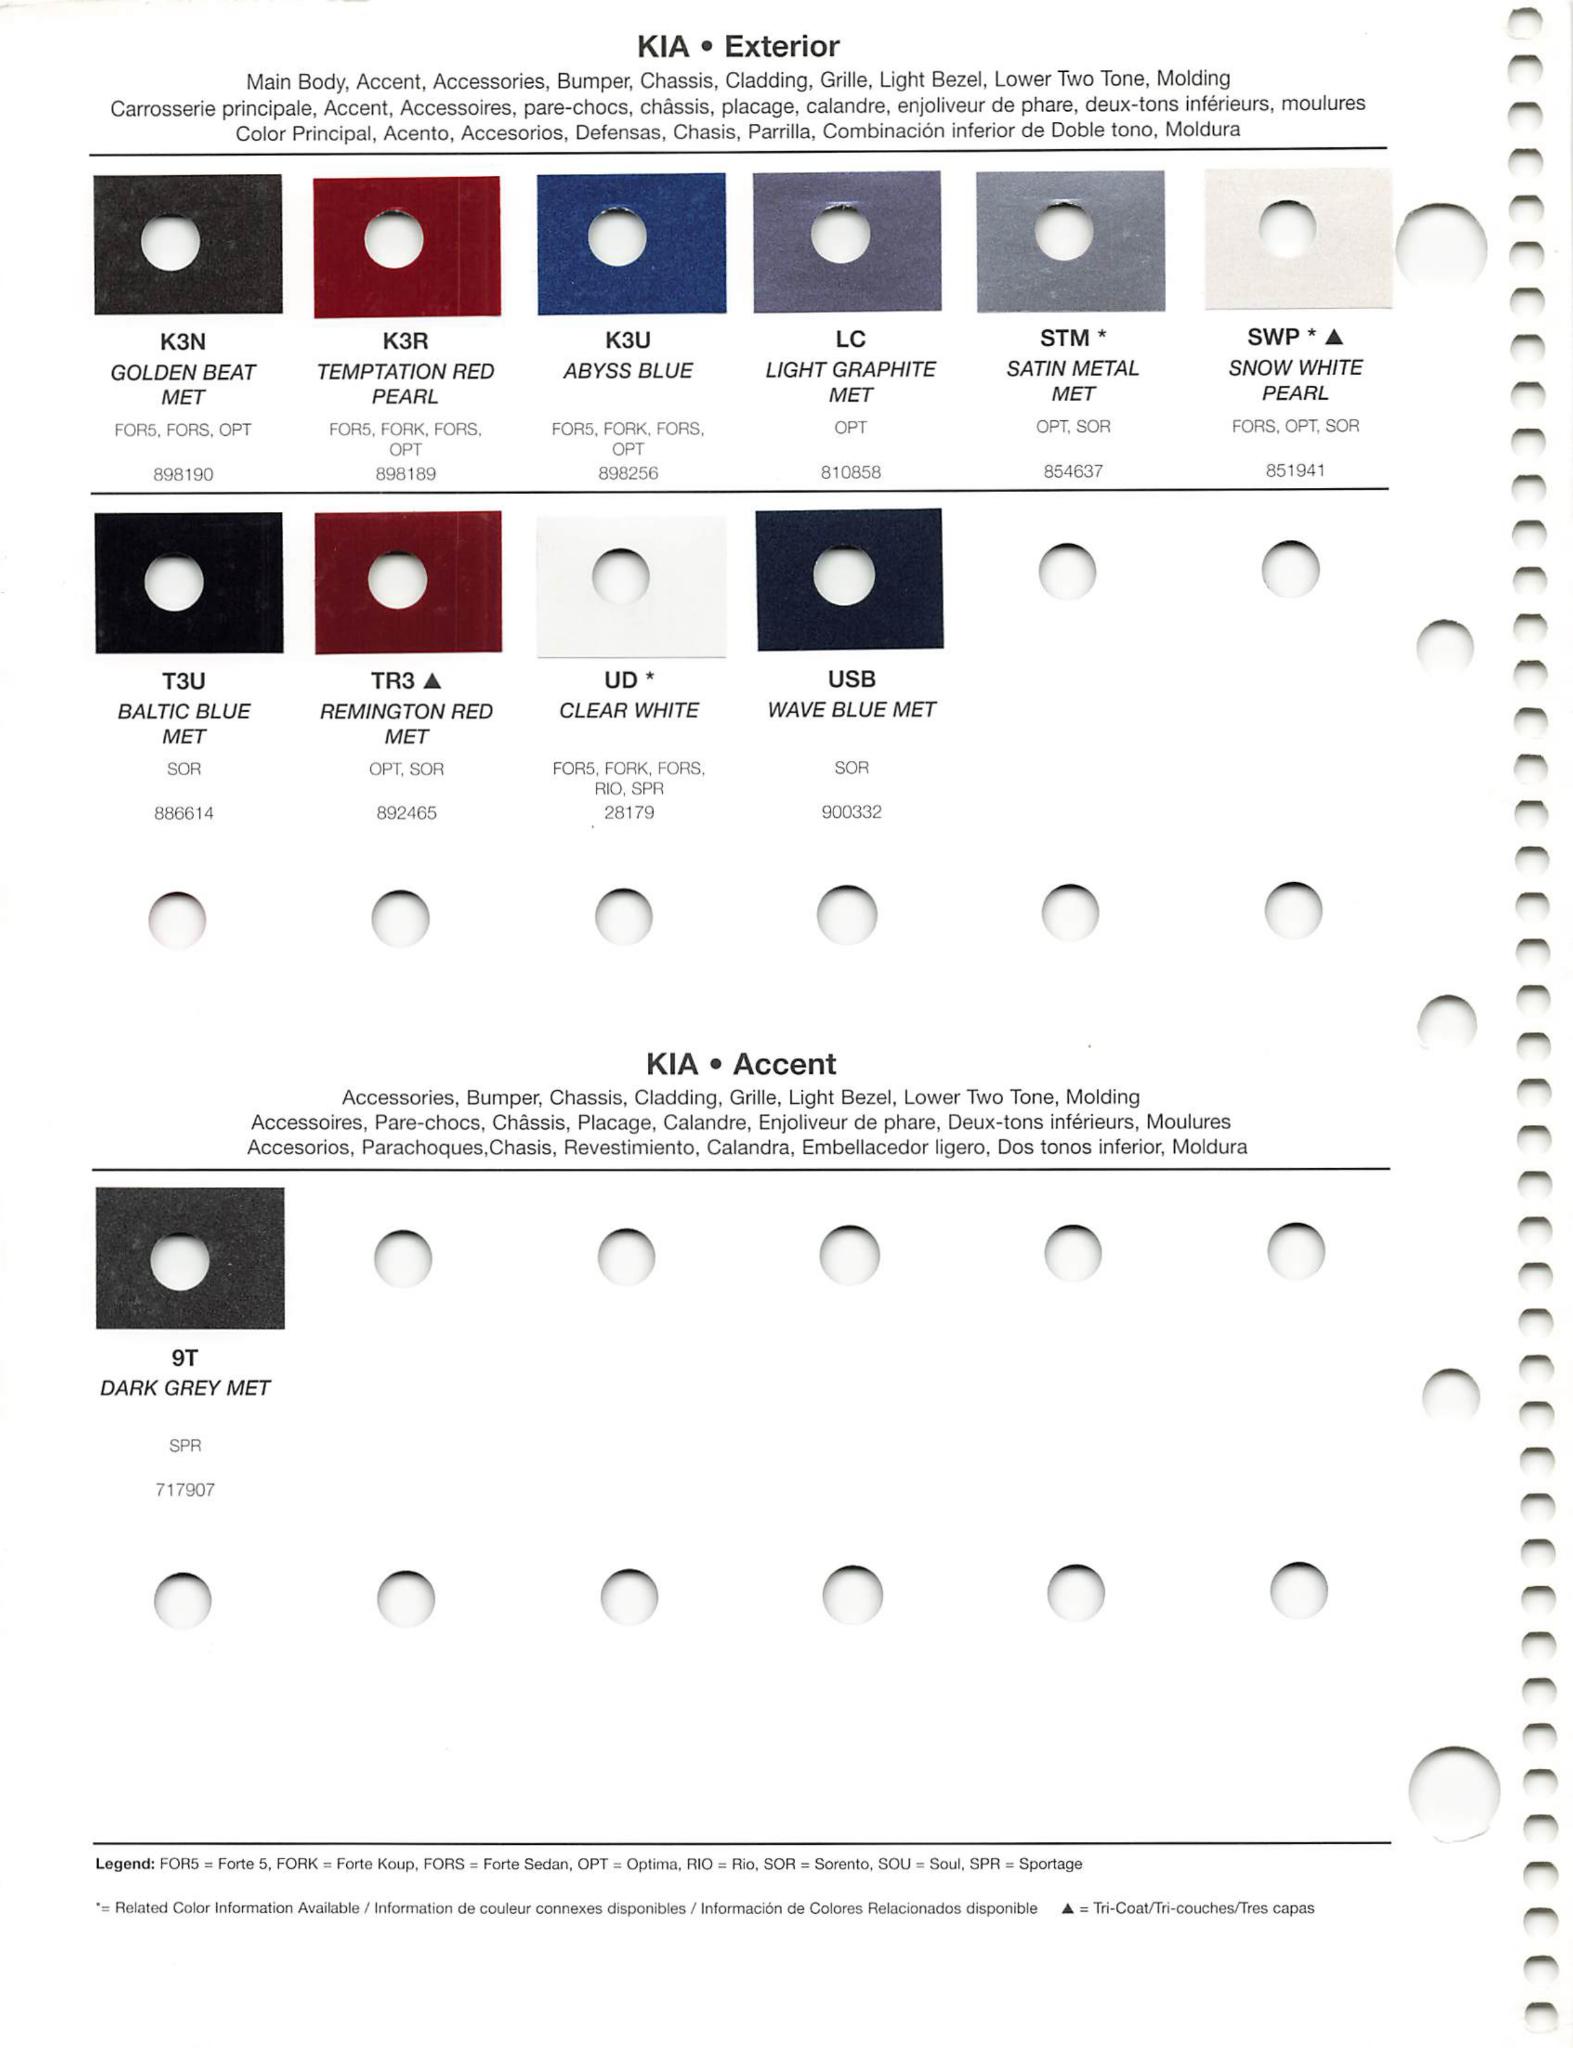 Paint Codes and Color Names for 2013 Kia's